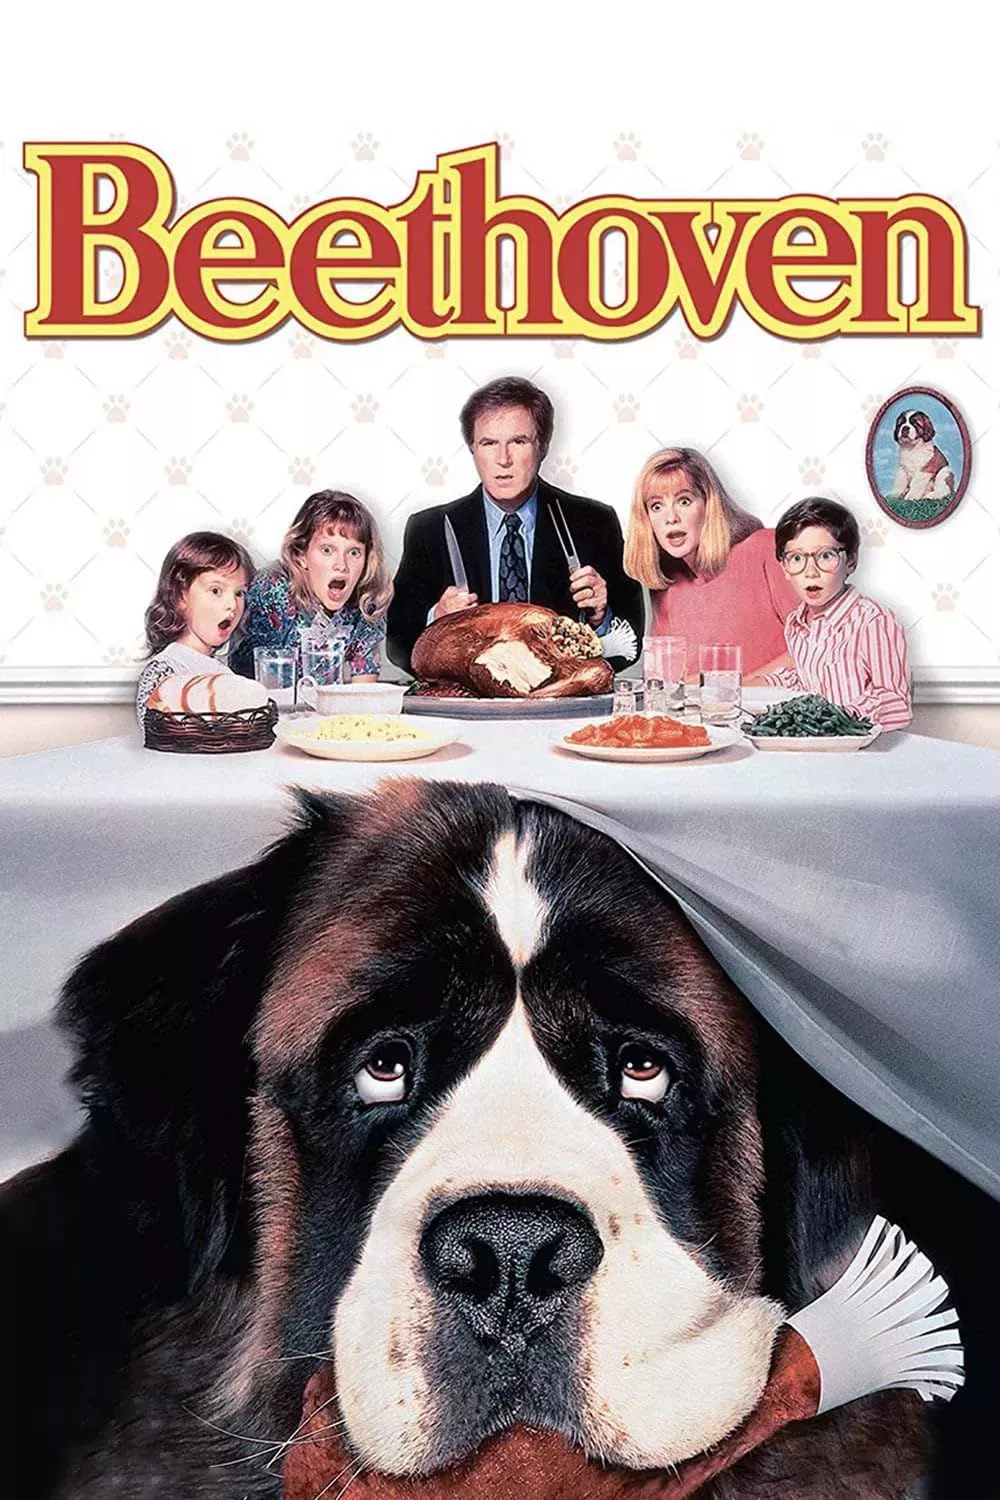 Beethoven movie poster featuring Beethoven the dog and the Newtons.